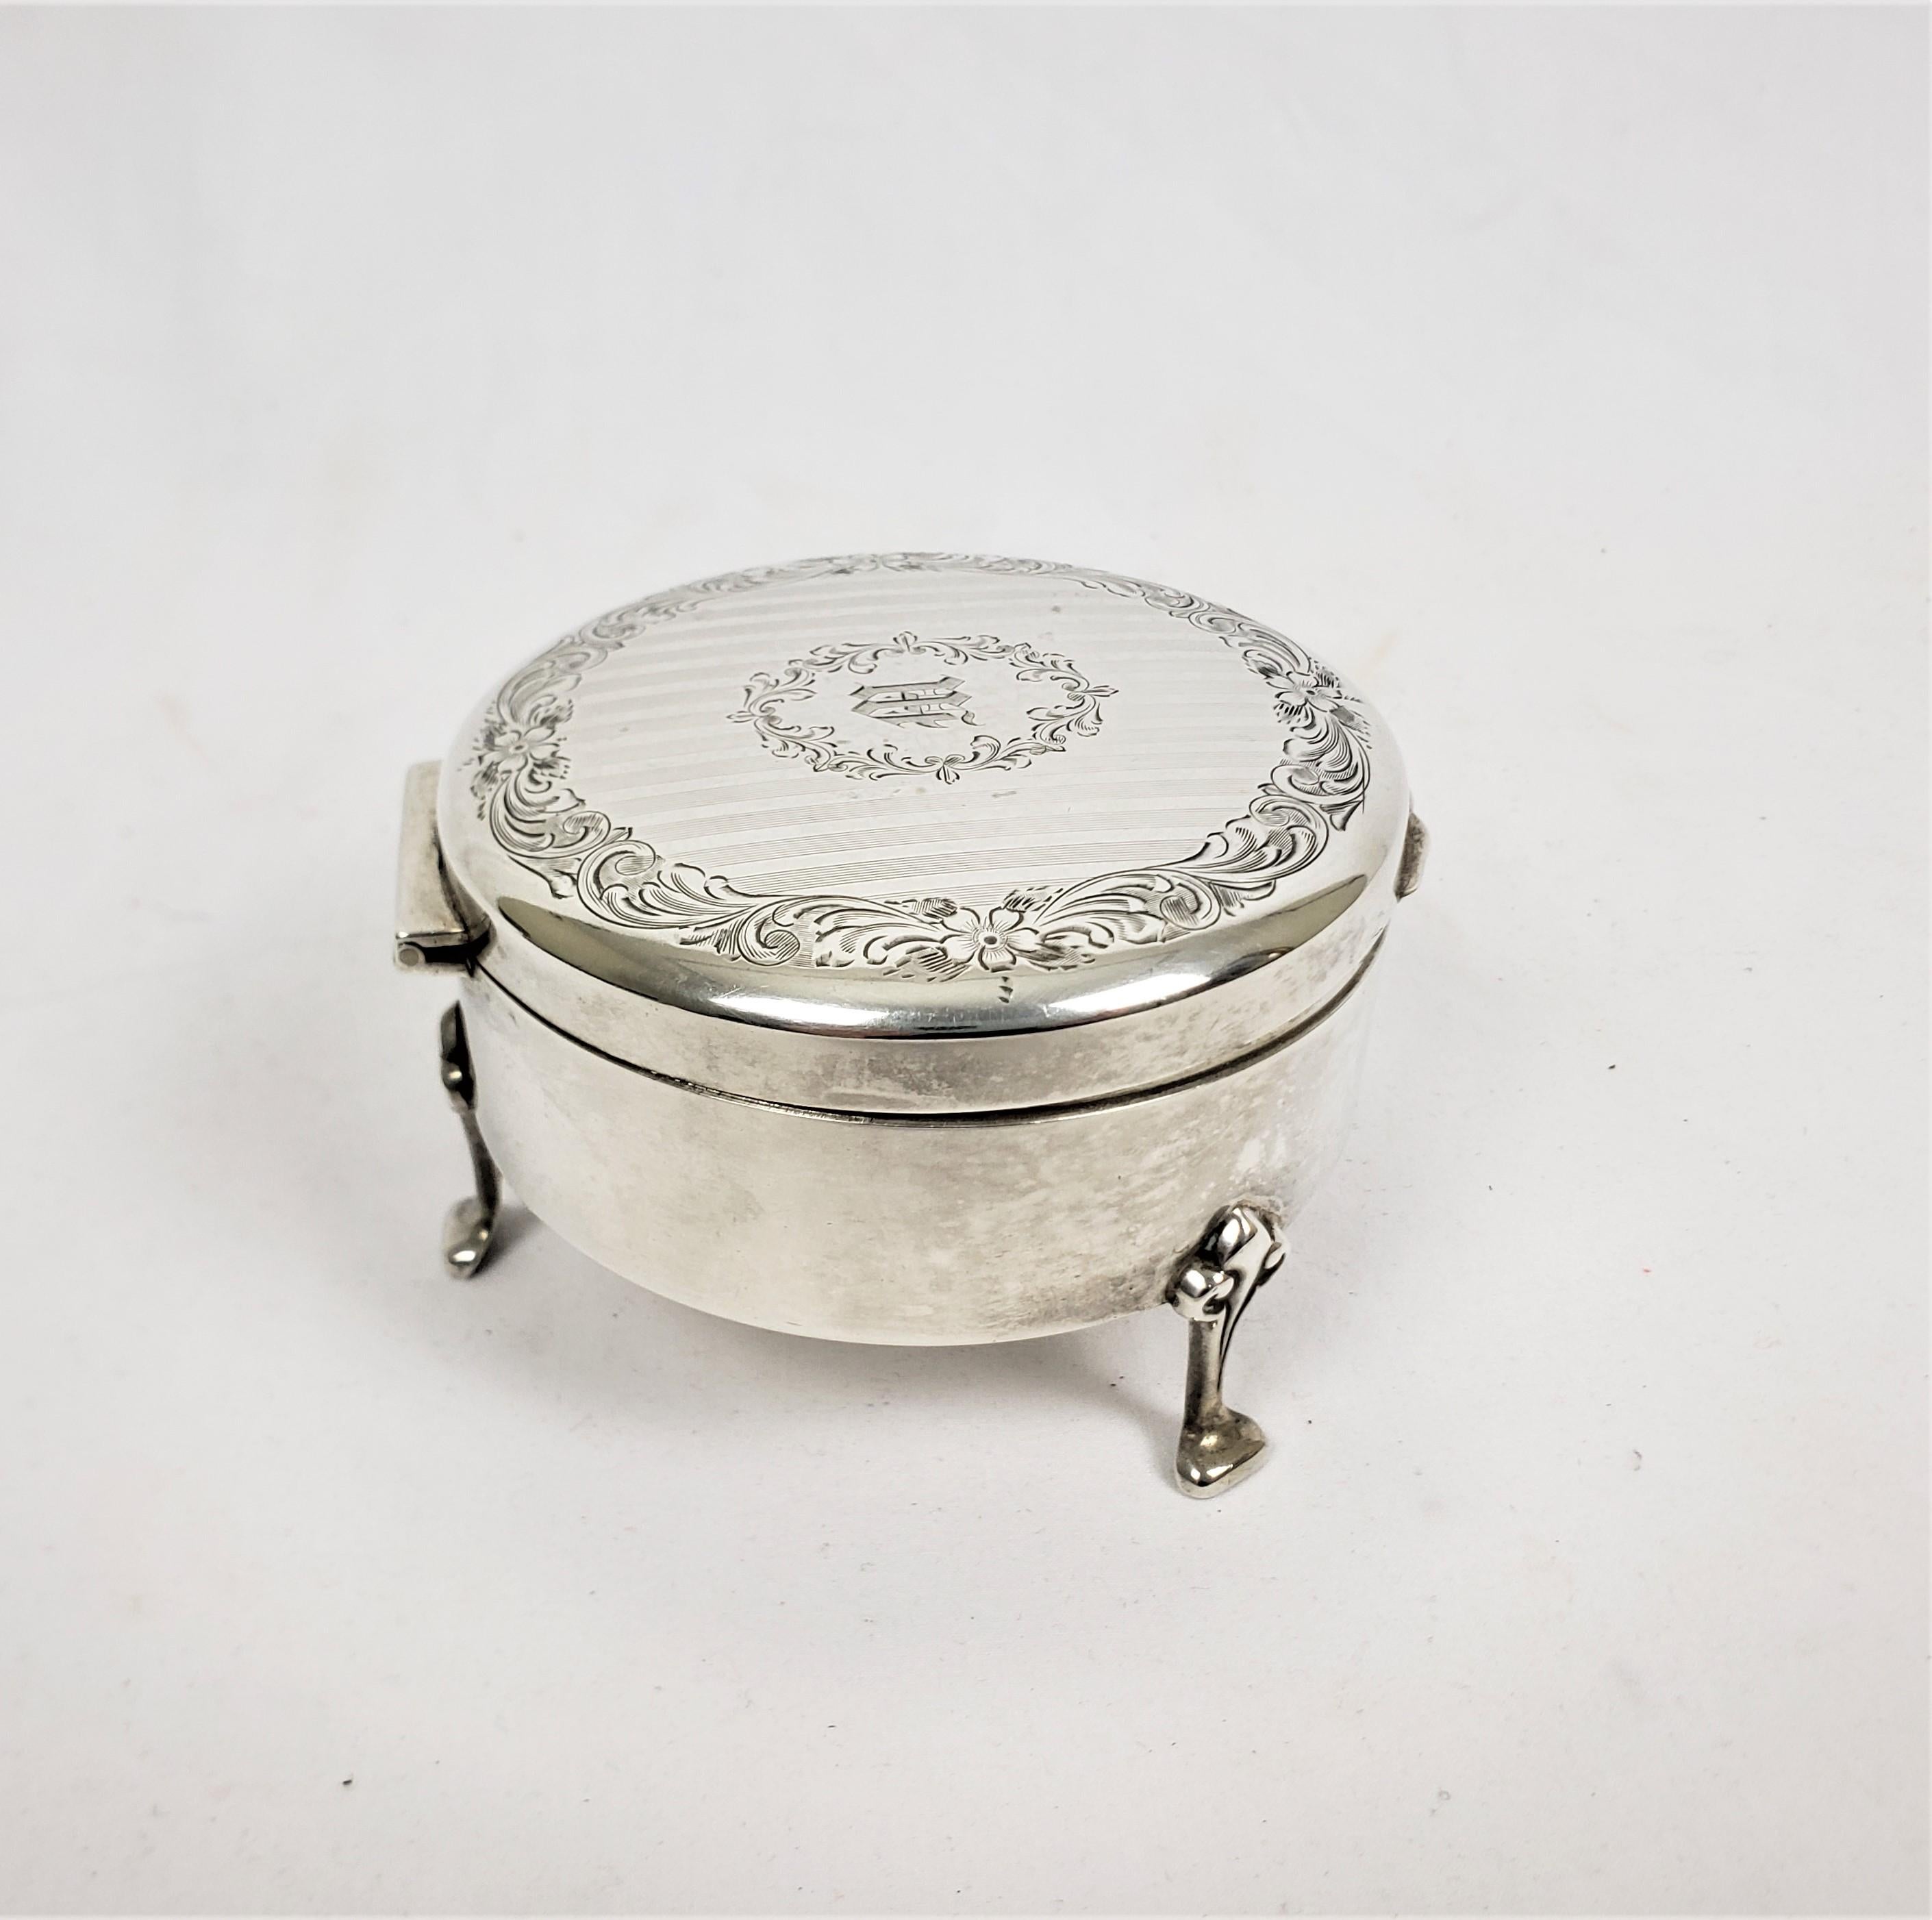 Antique Round Birks Sterling Silver Footed Jewelry & Ring or Trinket Box In Good Condition For Sale In Hamilton, Ontario